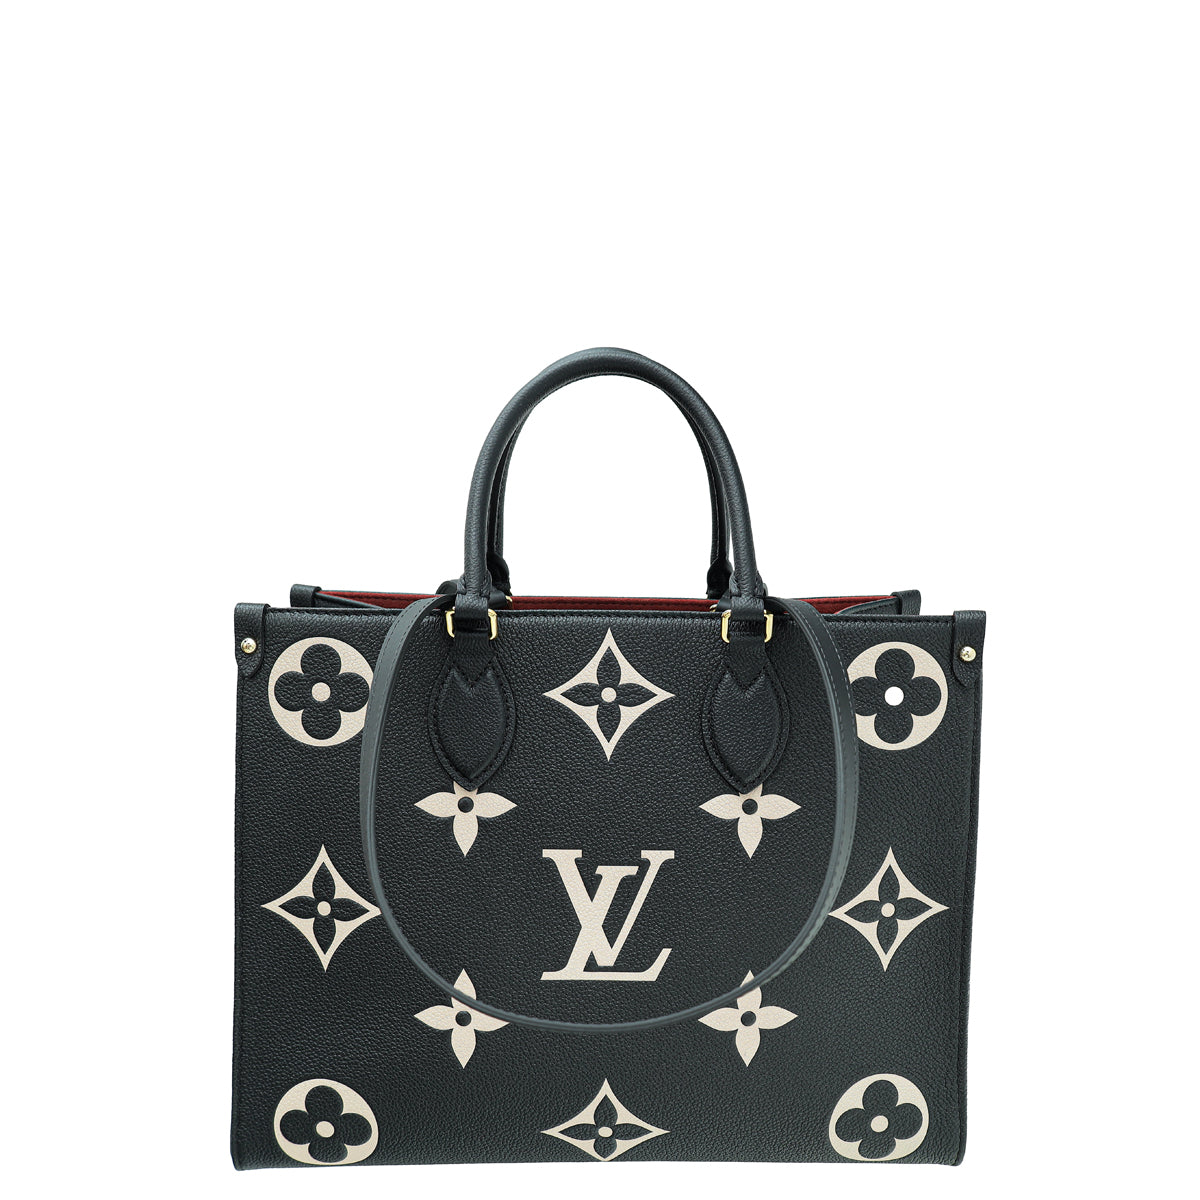 Bag of the Week - Louis Vuitton Onthego Tote – Inside The Closet